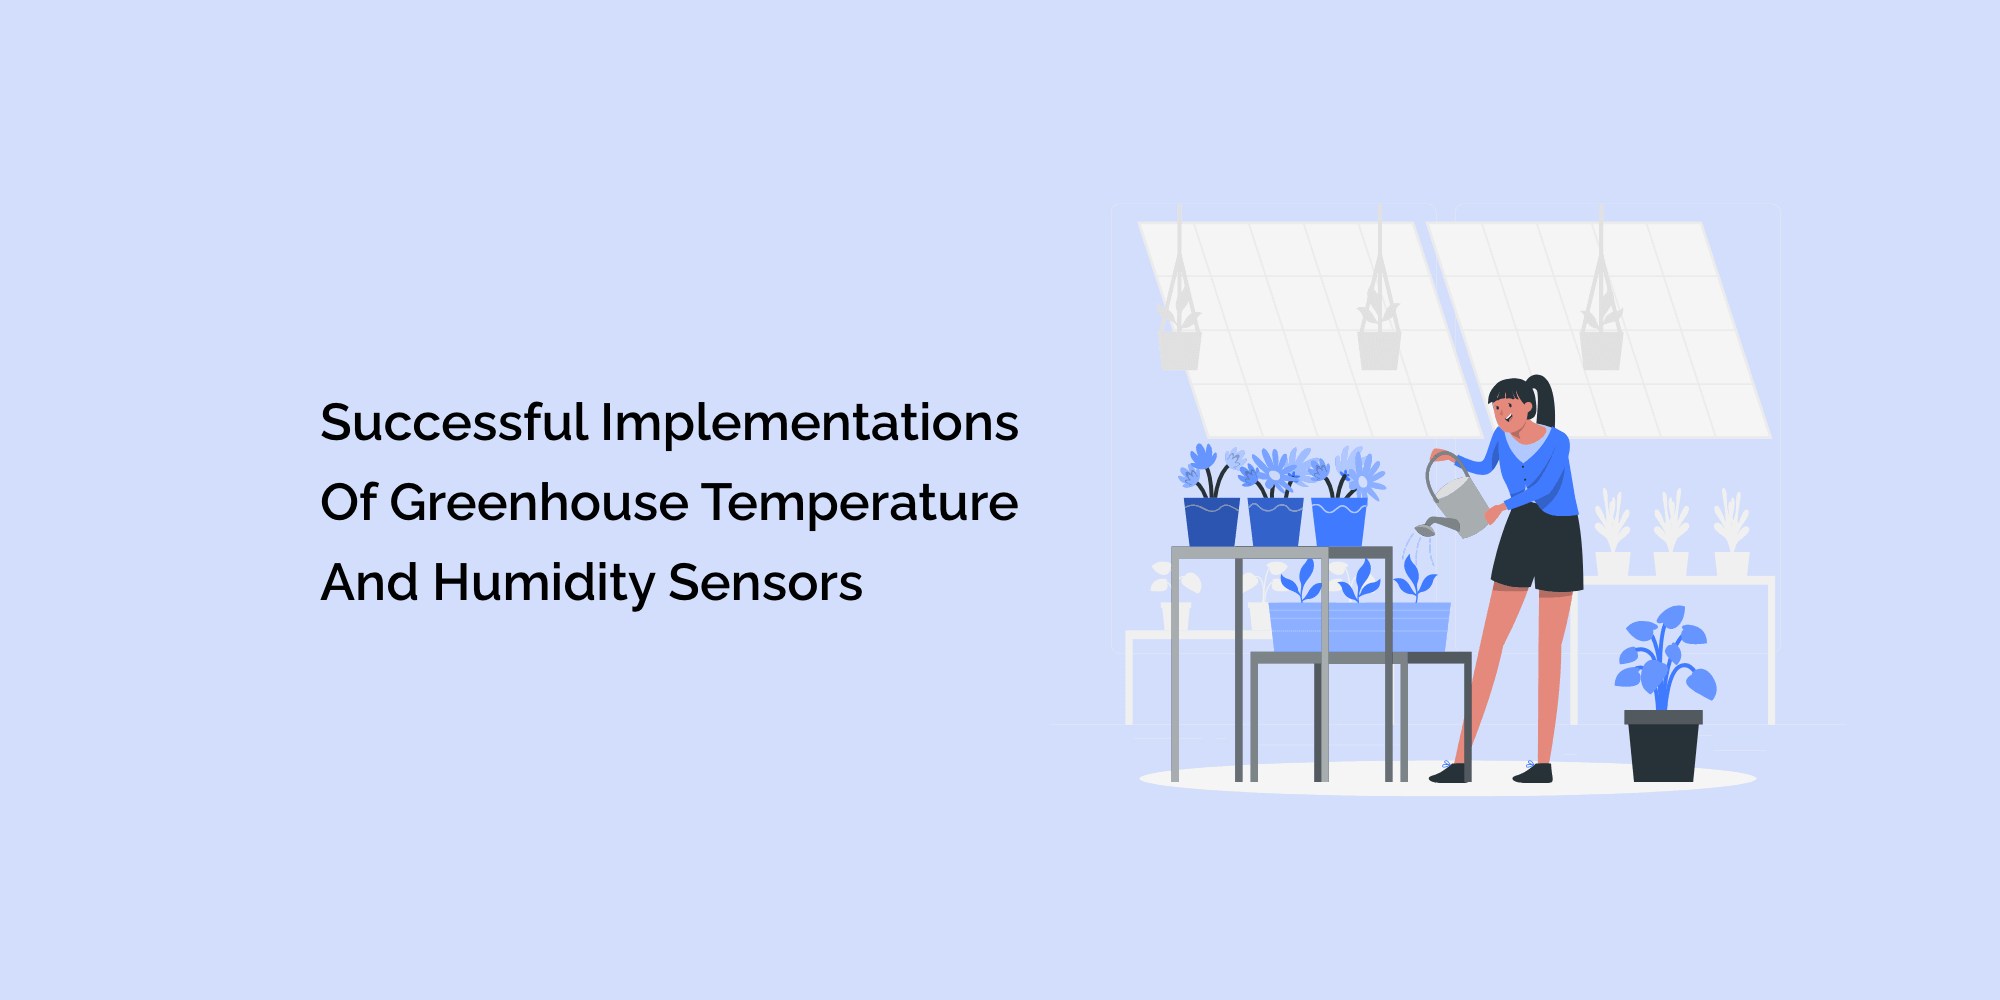 Successful Implementations of Greenhouse Temperature and Humidity Sensors